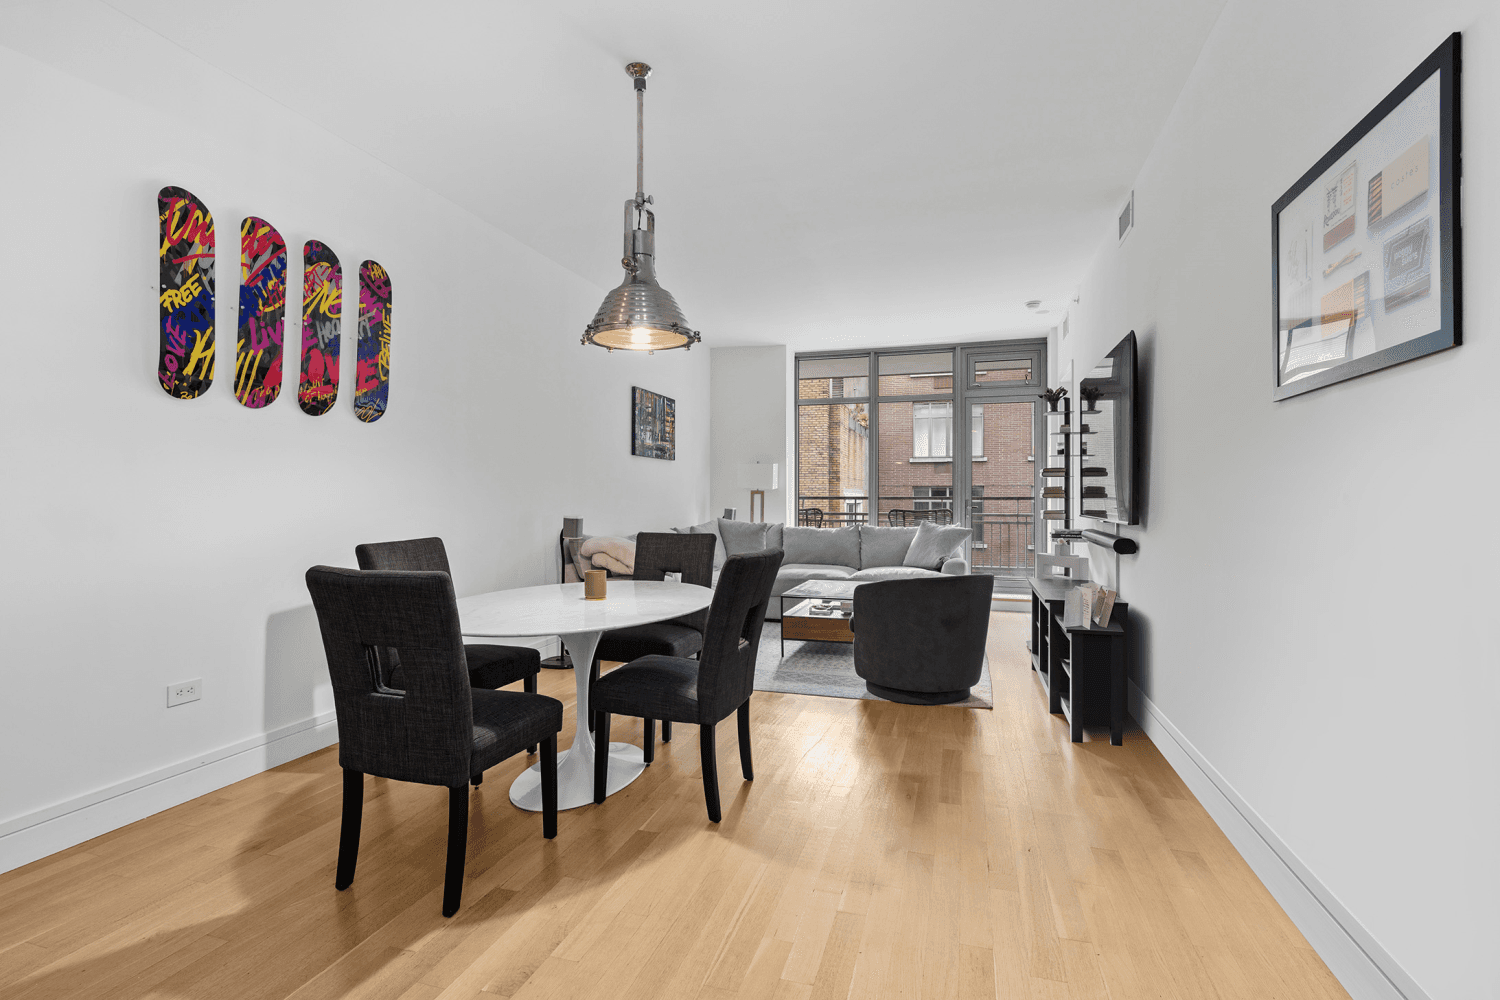 Seconds from Eataly, Madison Square Park, and NoMad is this beautiful 1 bedroom, 1.